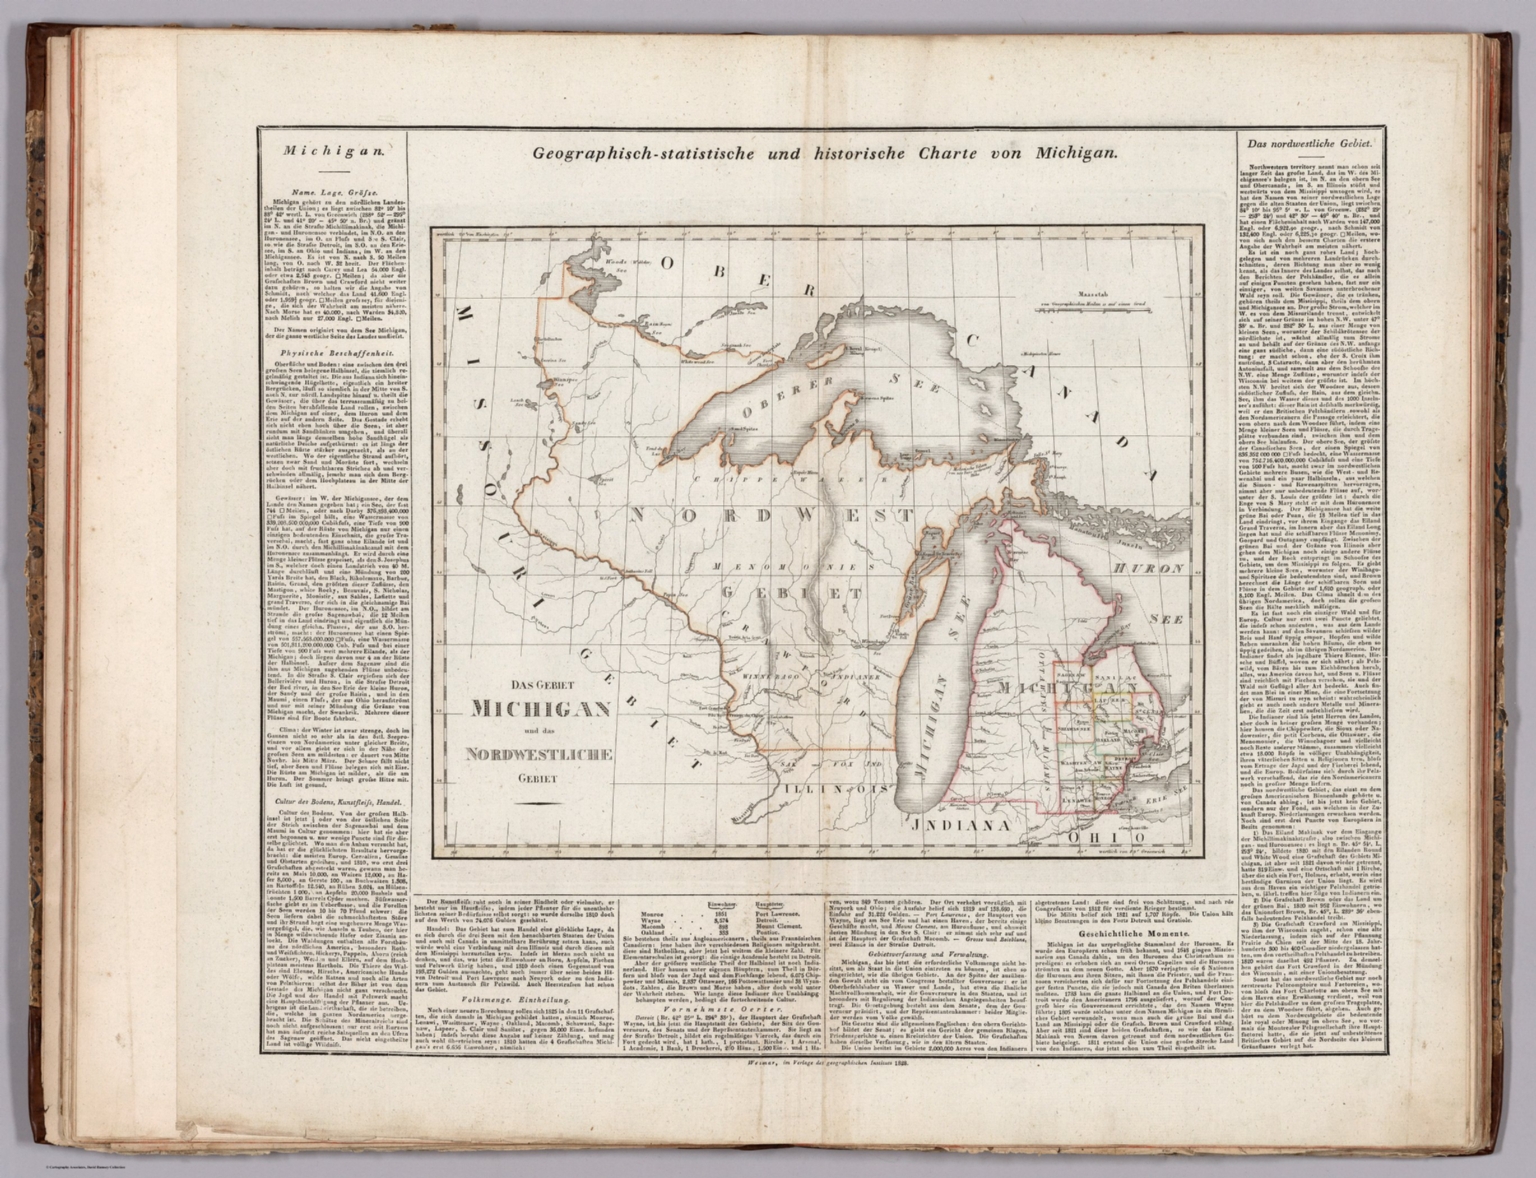 Michigan David Rumsey Historical Map Collection 4384